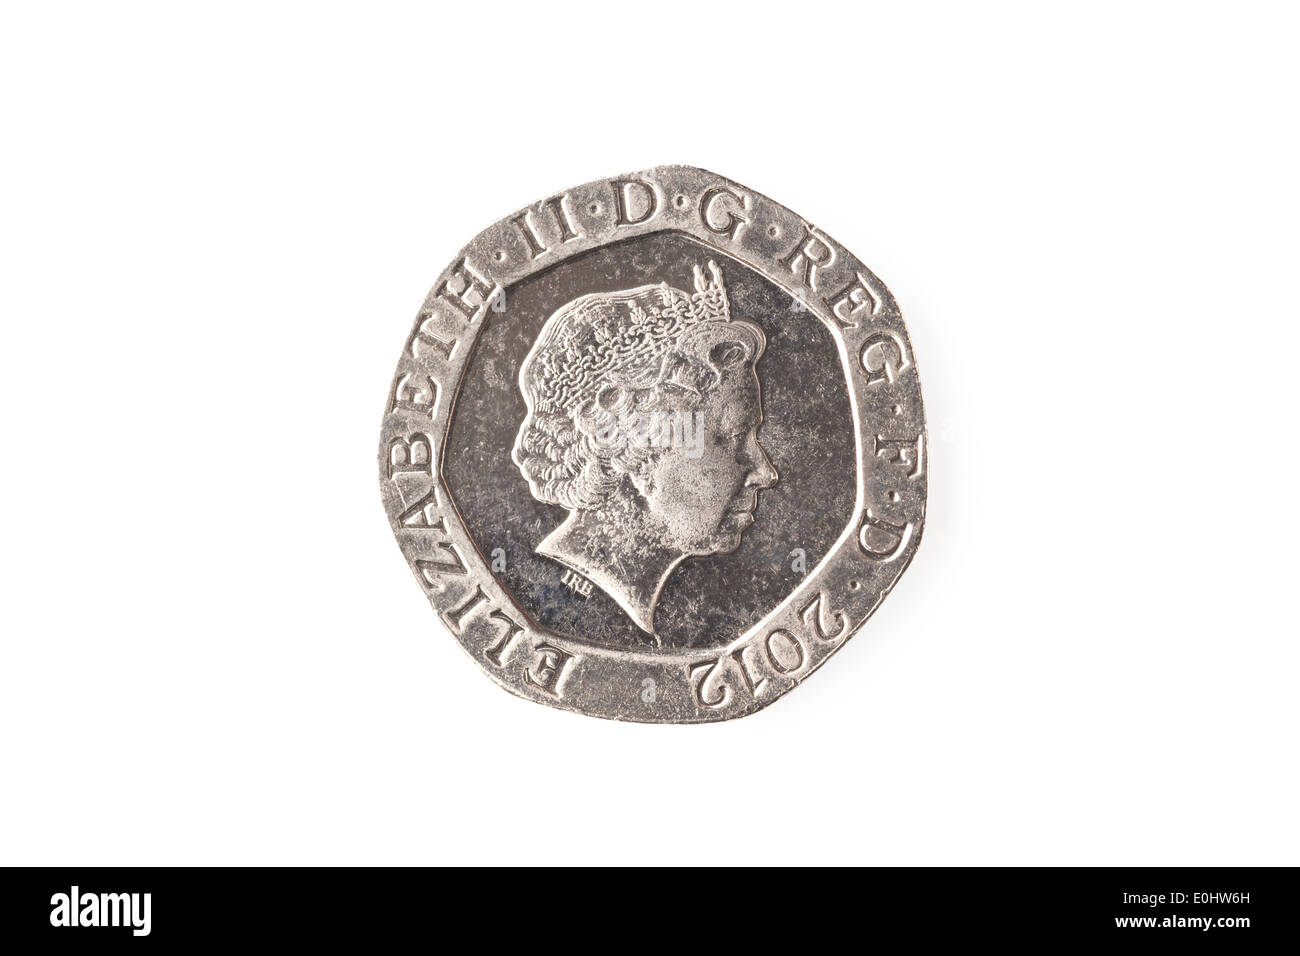 20 pence sterling coin Stock Photo